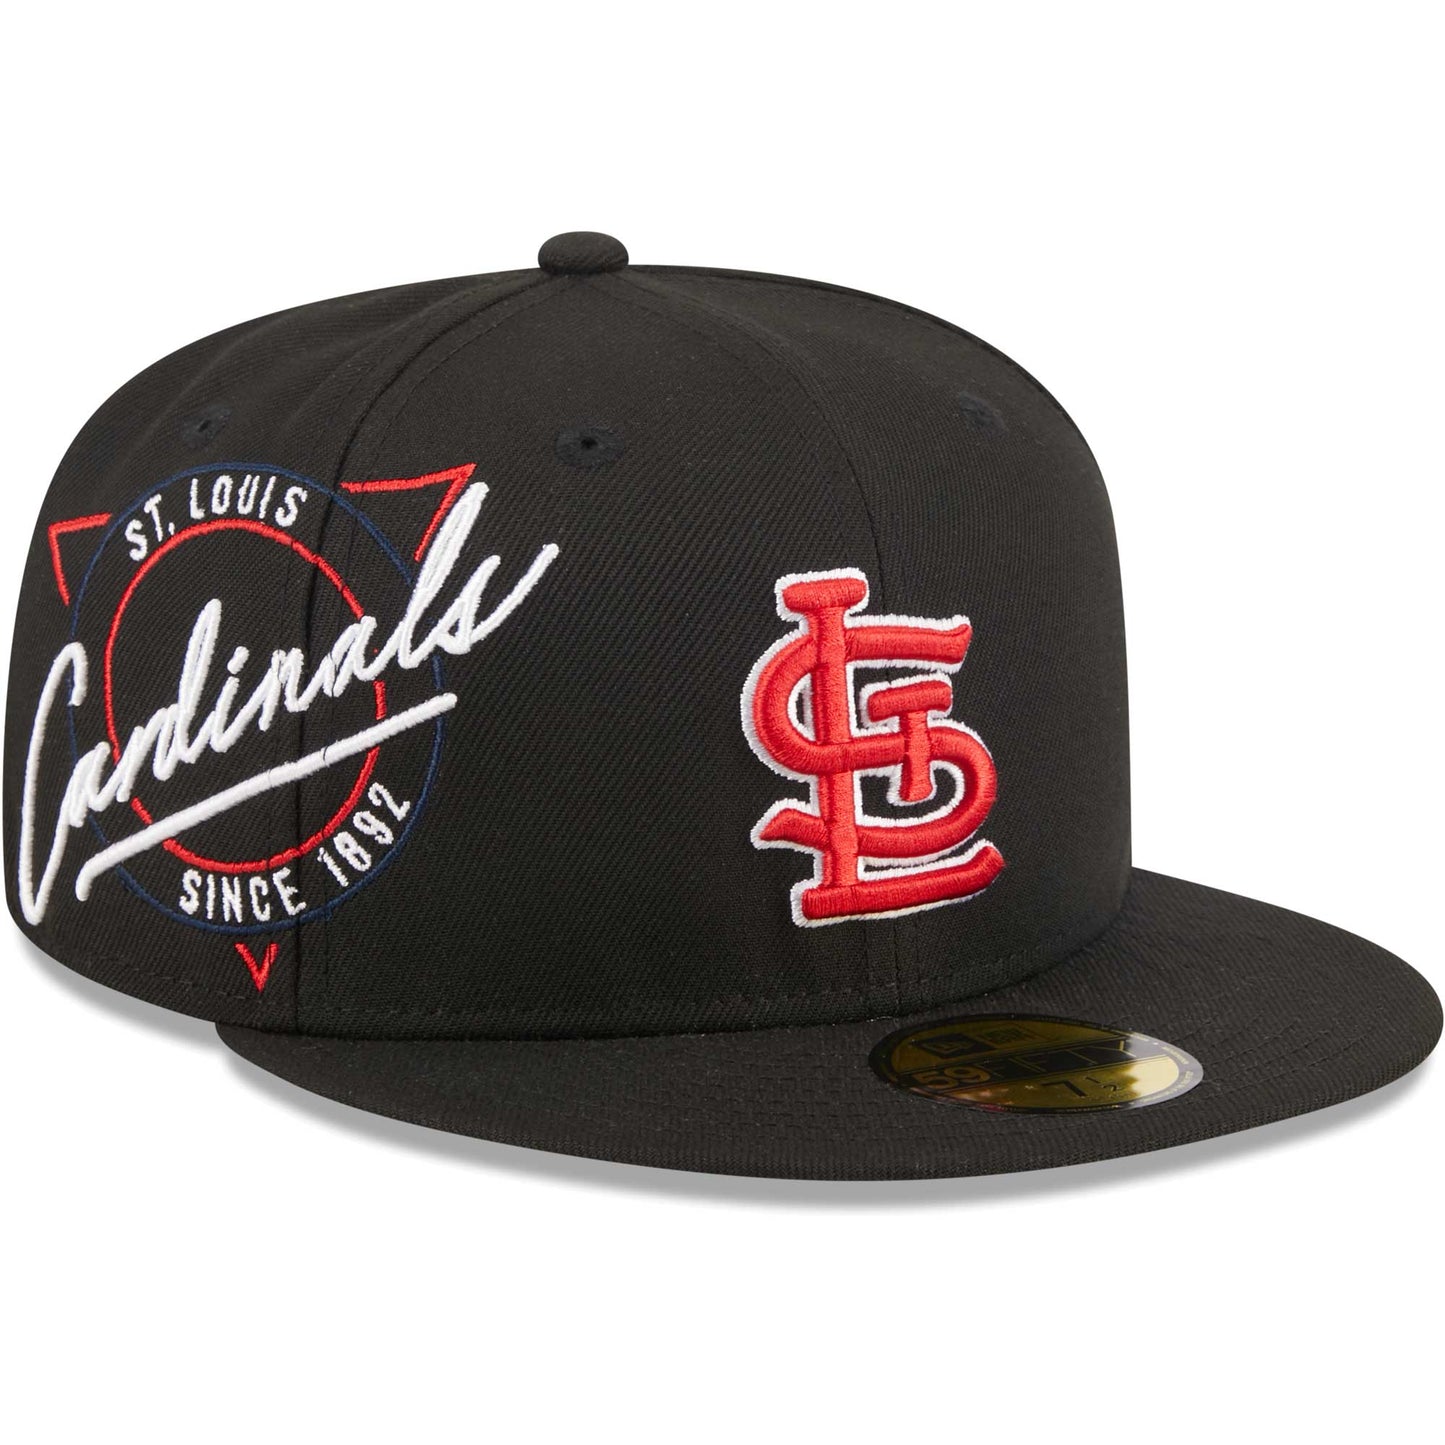 St. Louis Cardinals New Era Neon 59FIFTY Fitted Hat - Black